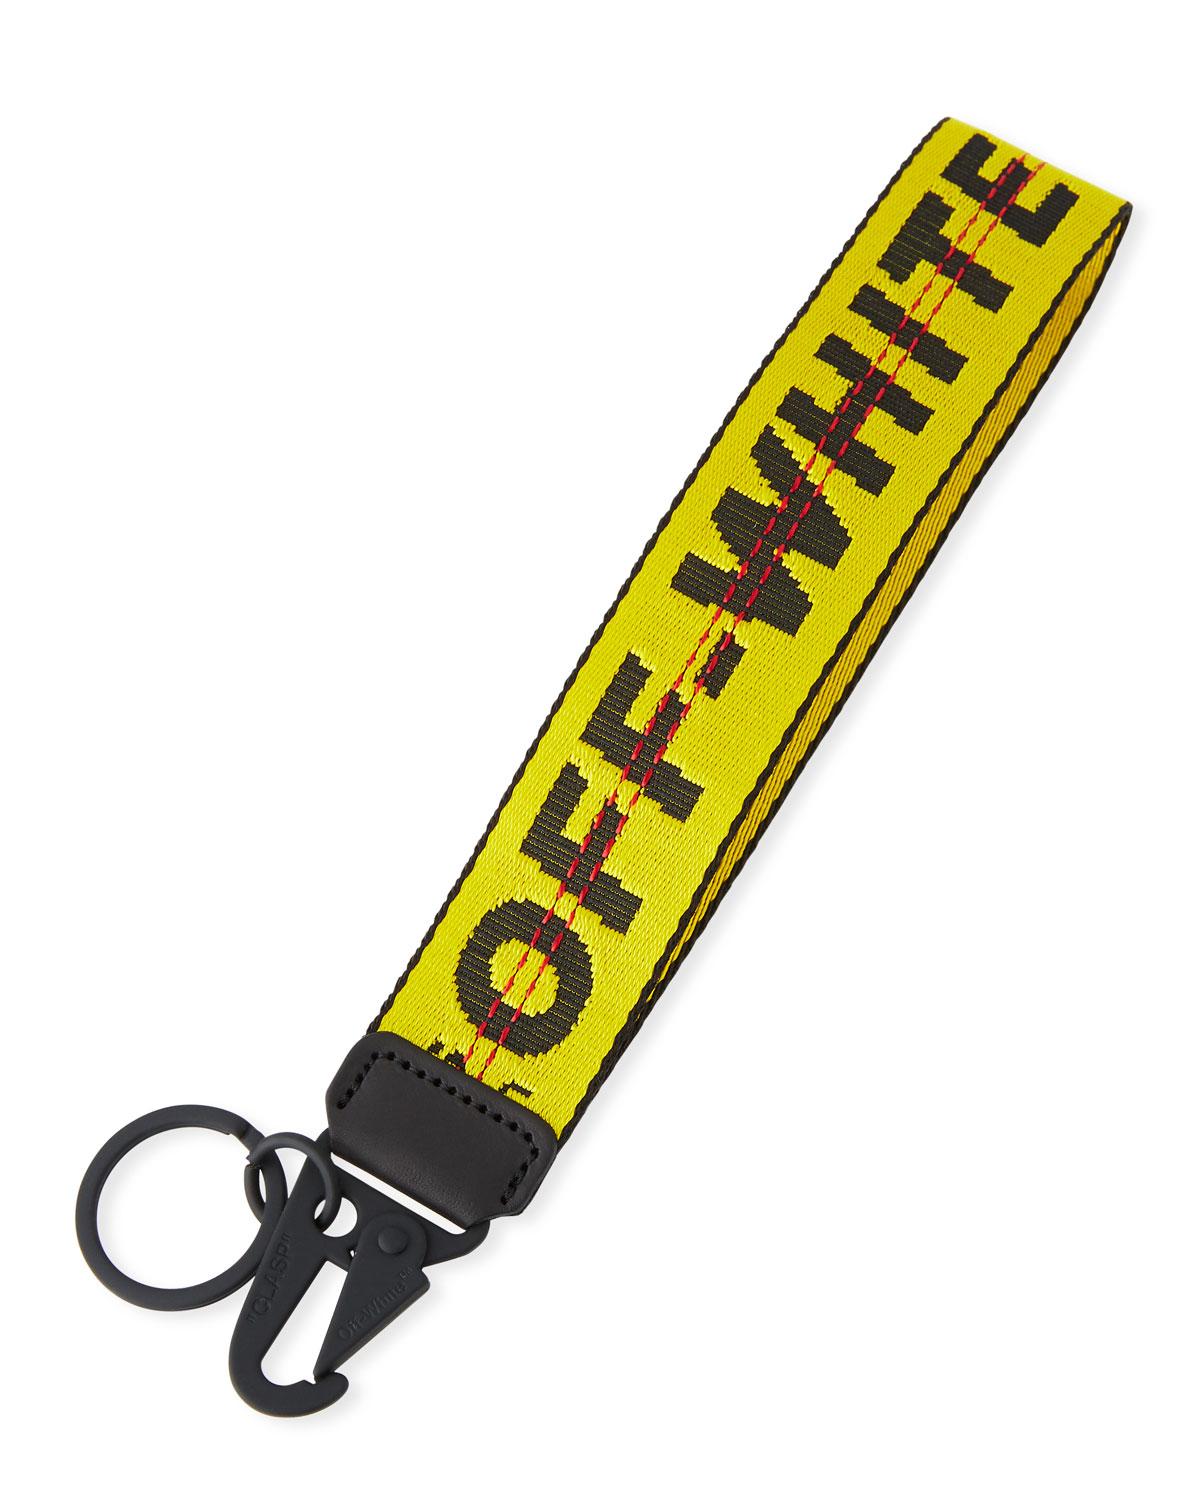 Off White Inspired Industrial 10.5" strap Keychain Lanyard FREE SHIPPING USA 